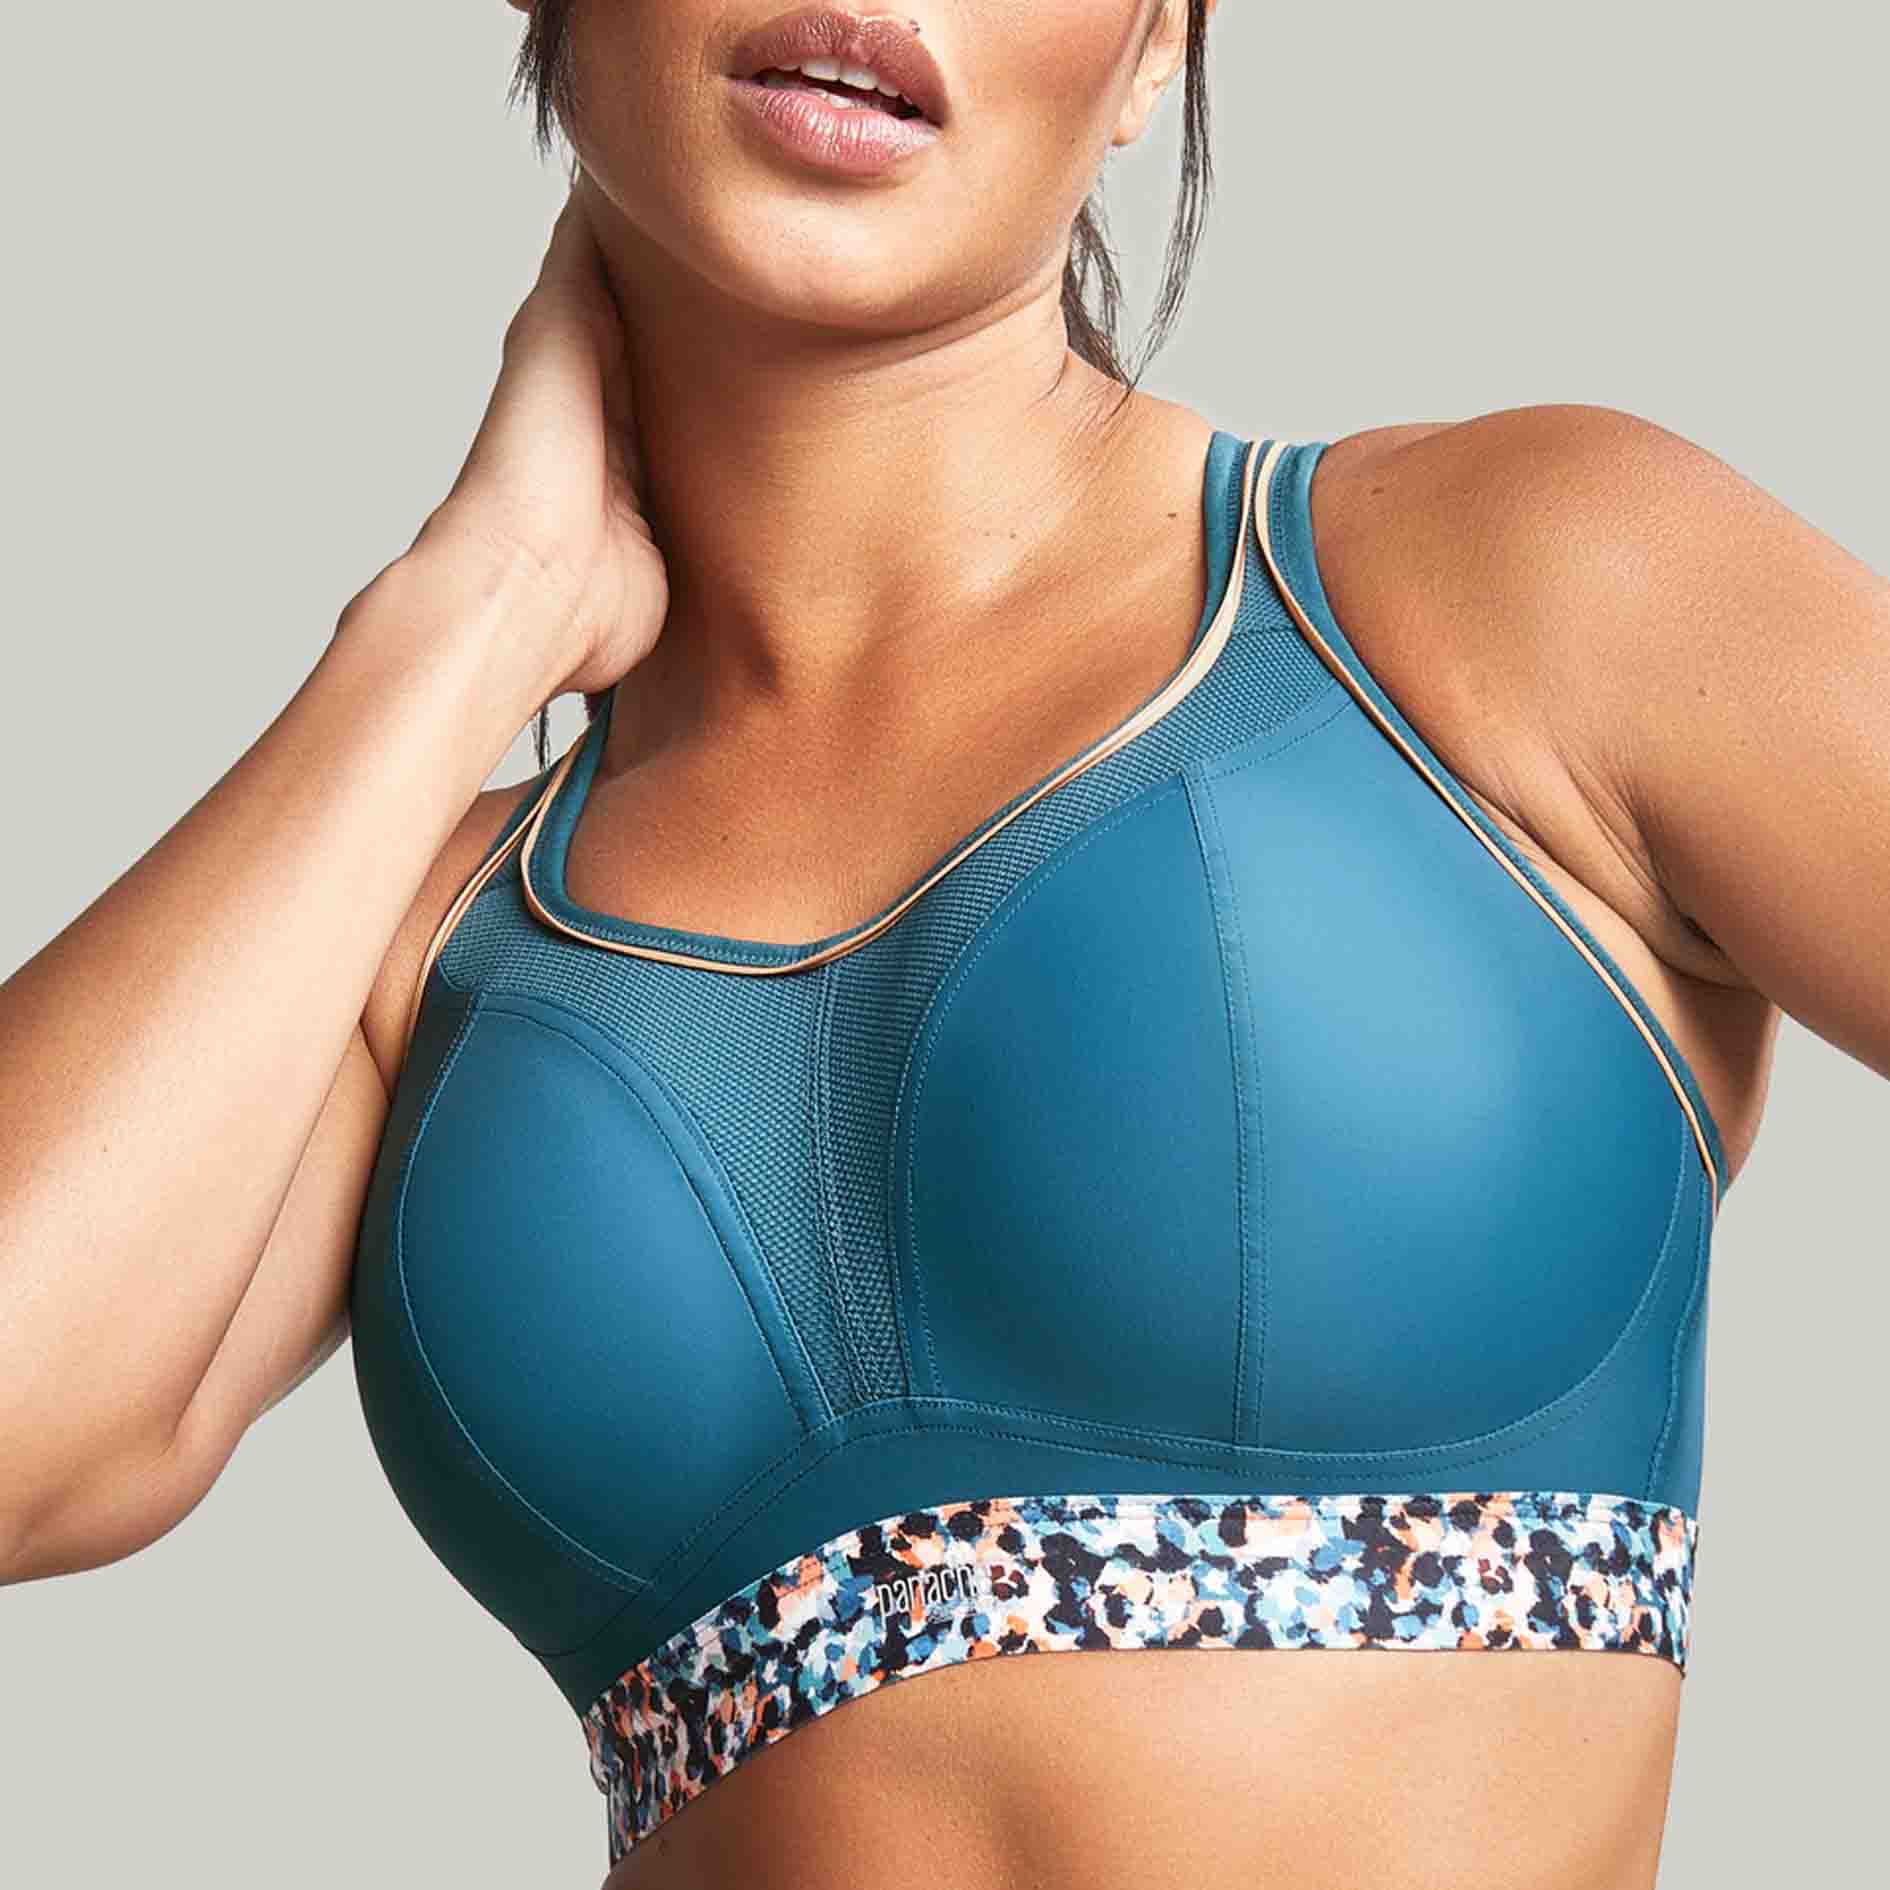 Get This Wired Sports Bra In Black/Aqua by Panache Now